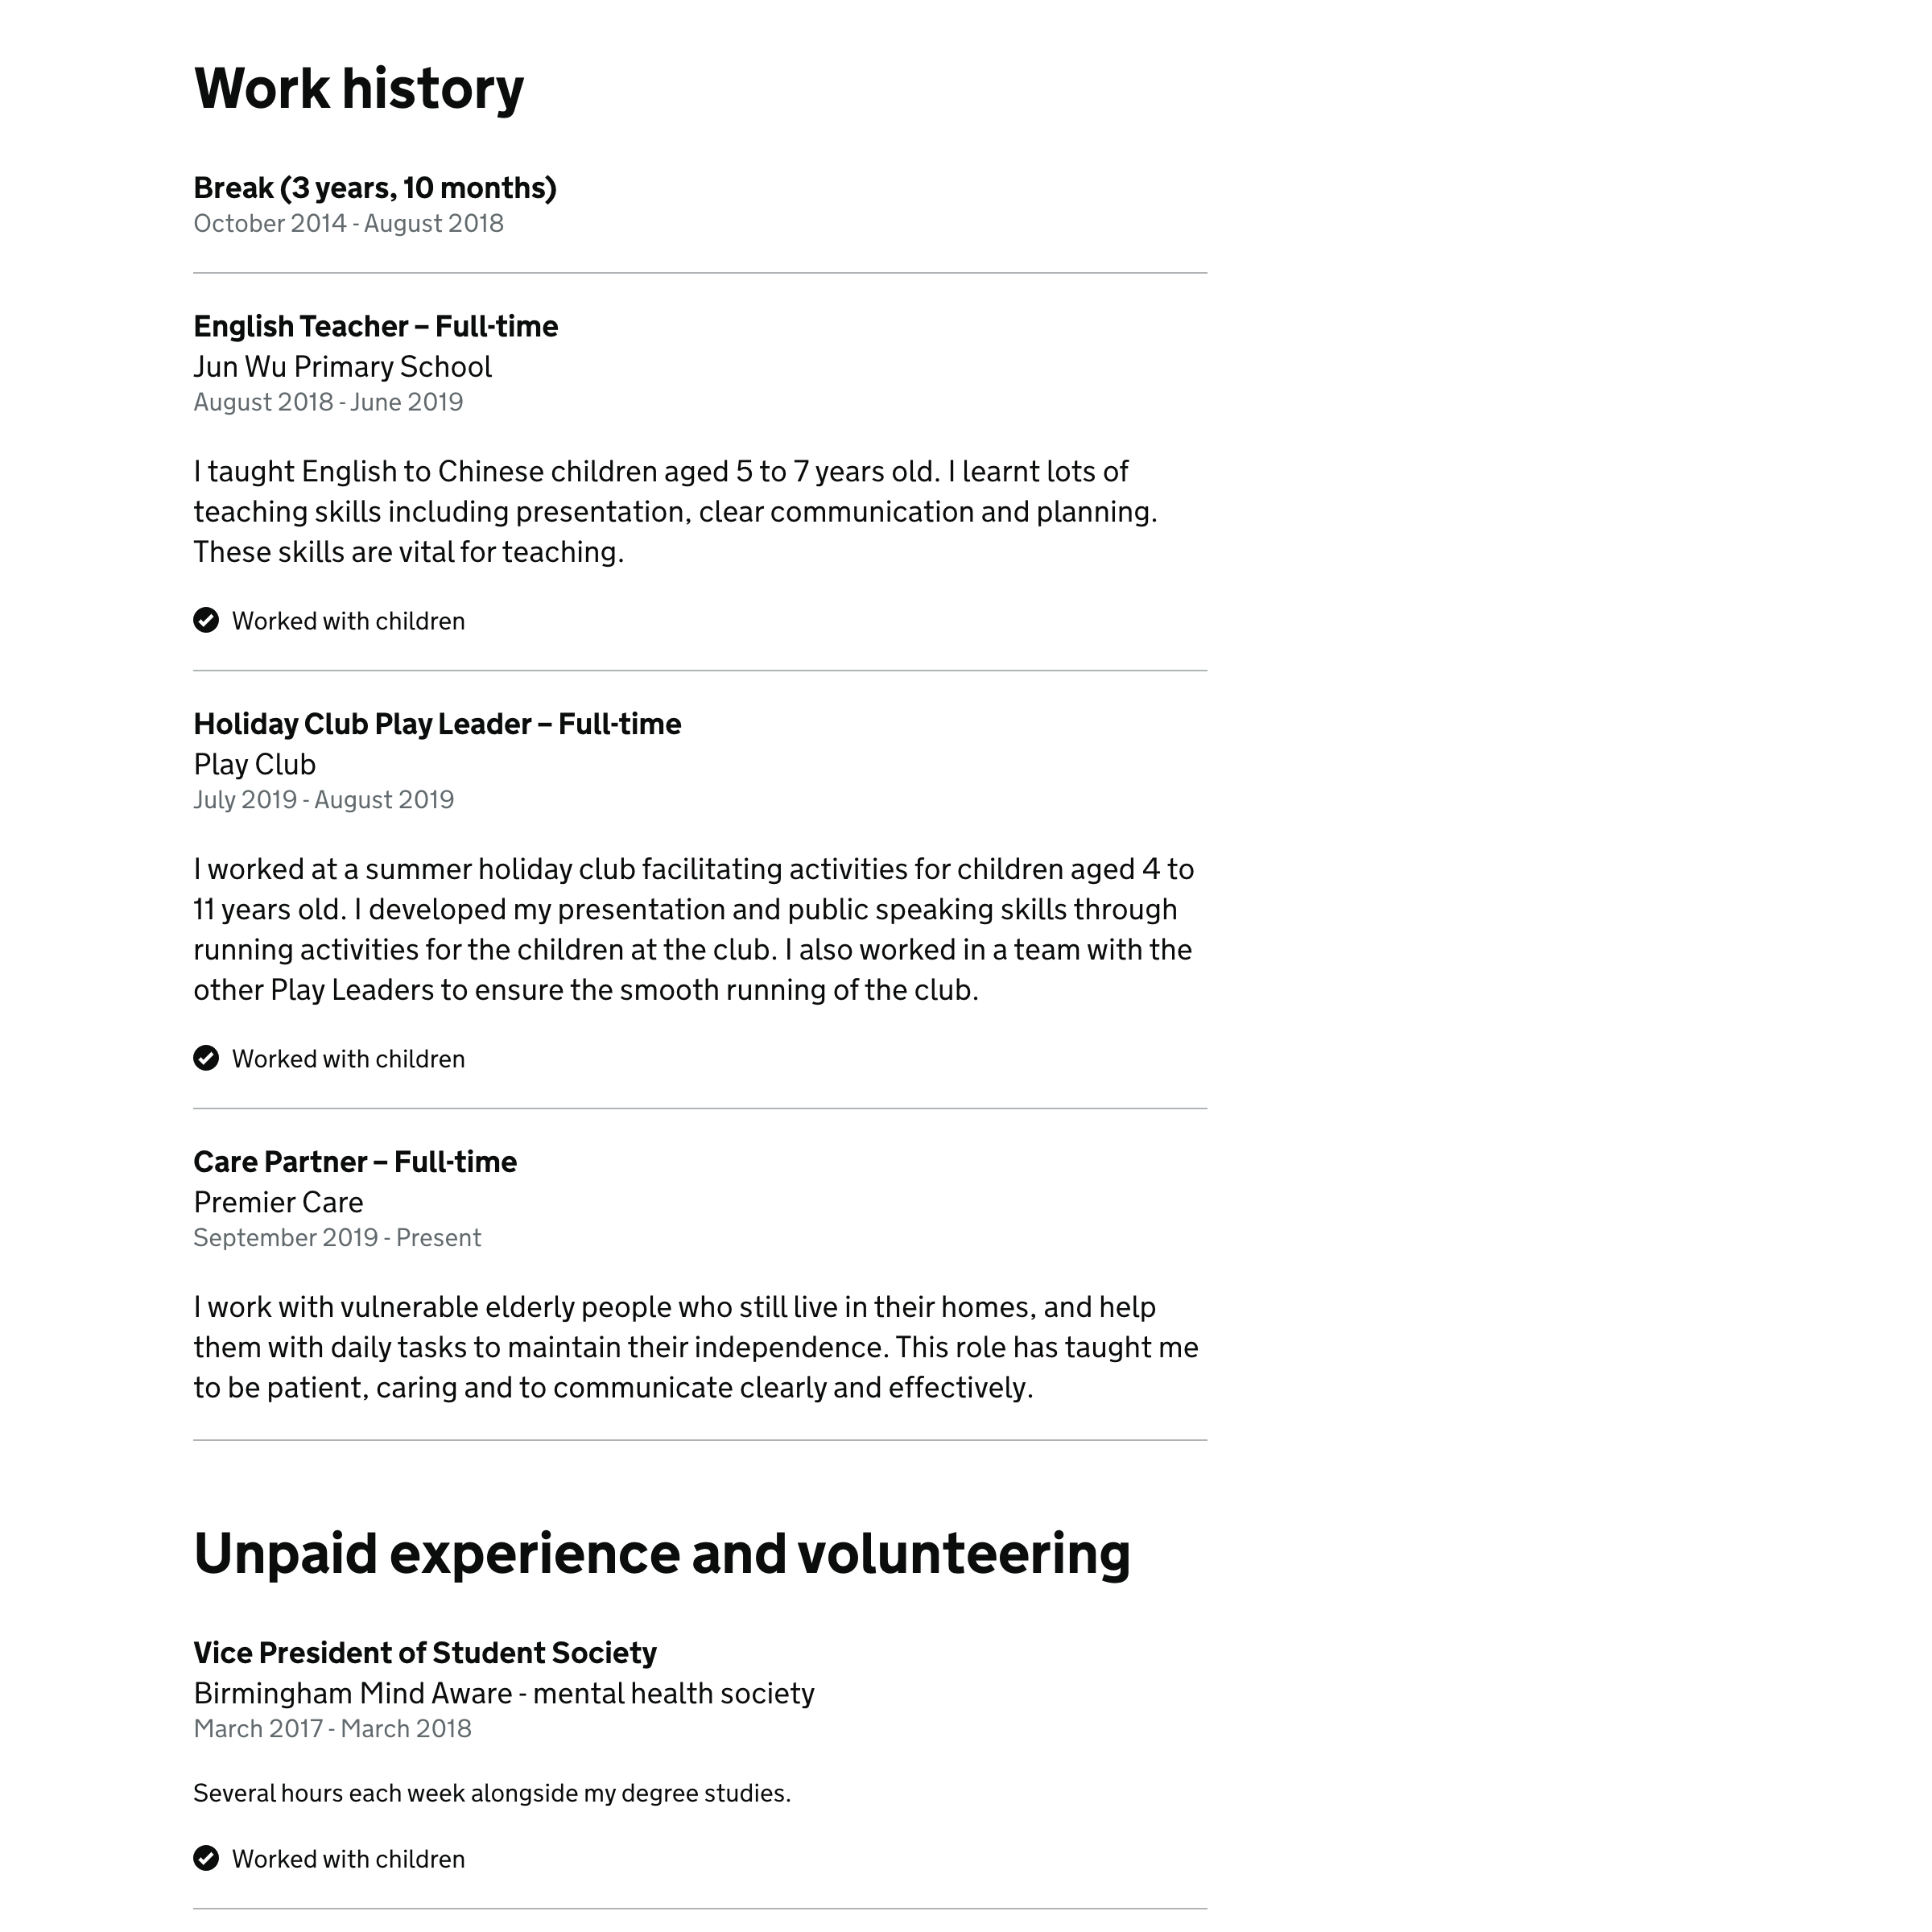 Screenshot of ‘Work history’ section of application form.